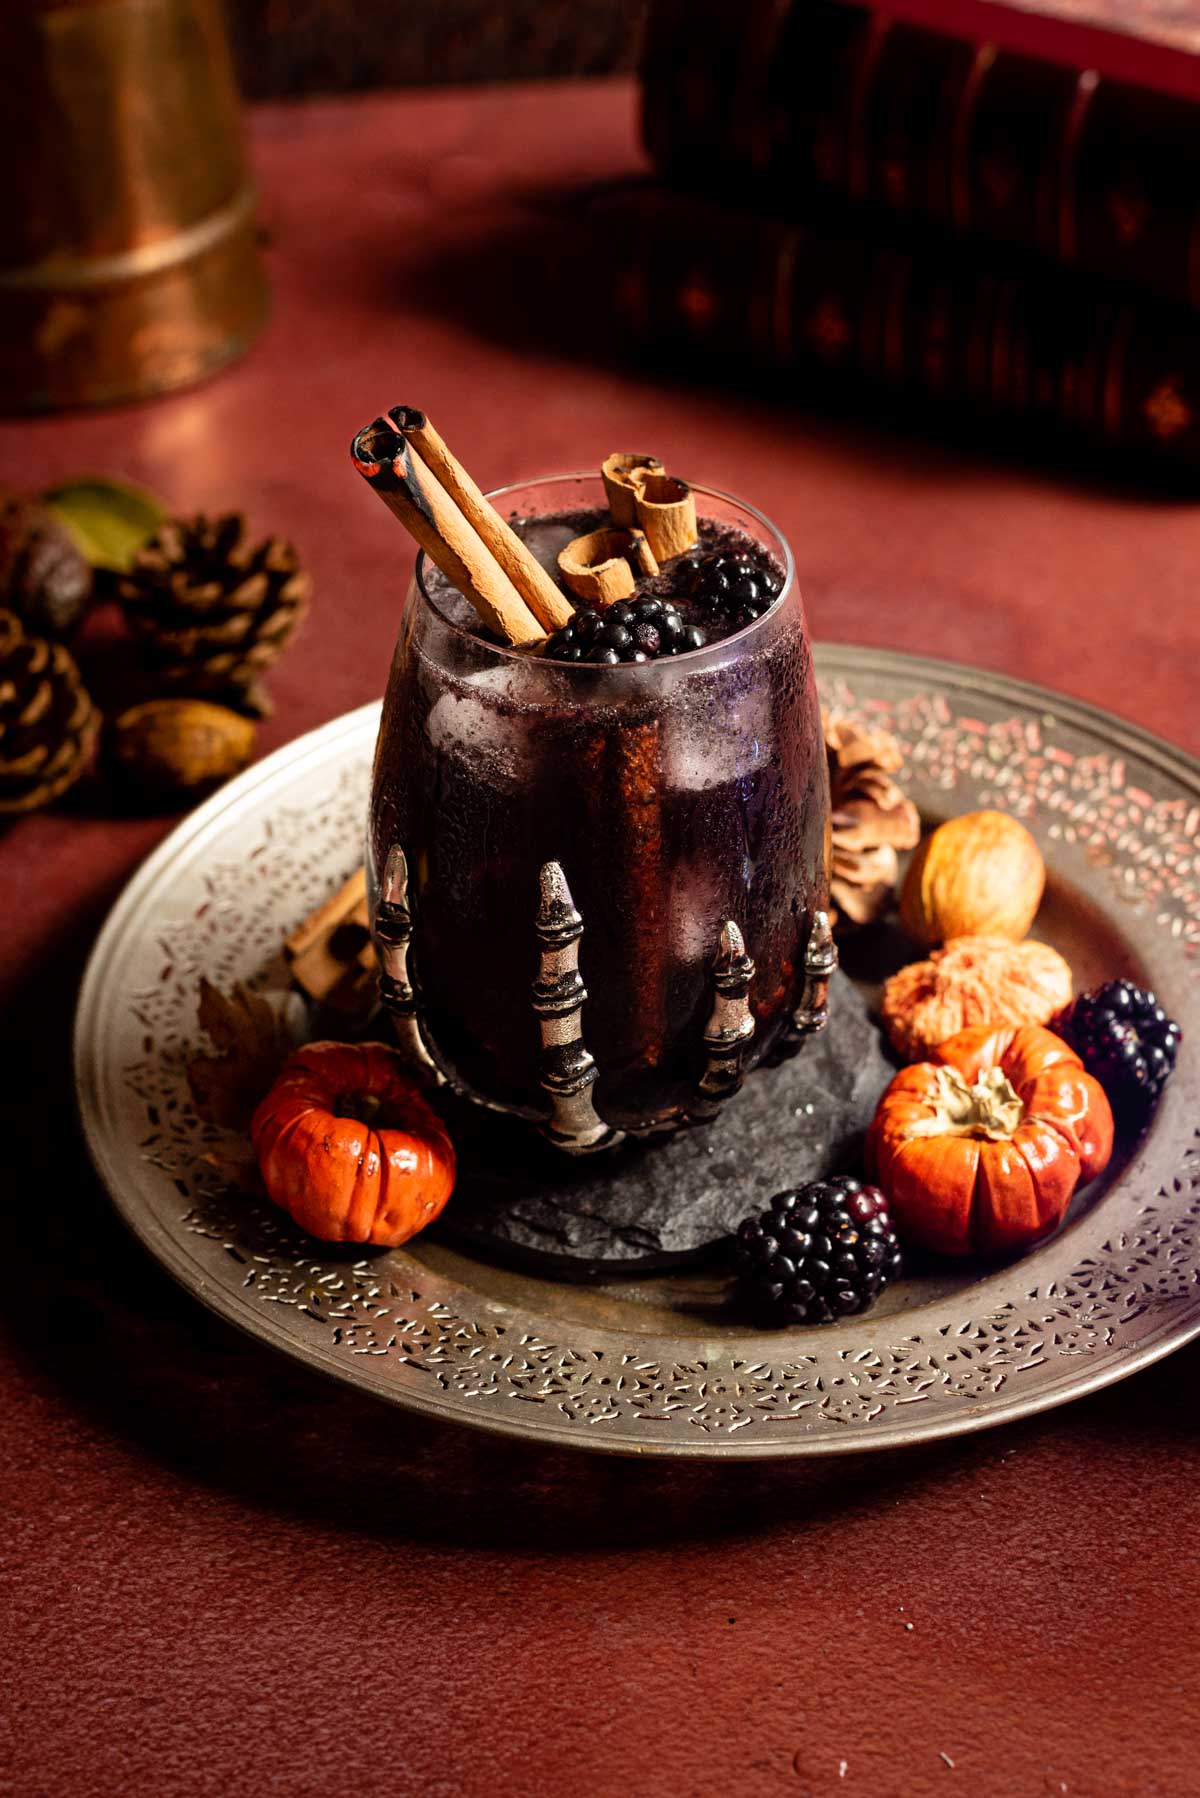 The Black Flame Candle in a glass with a skeleton hand on a sliver plate with blackberries and small pumpkins.